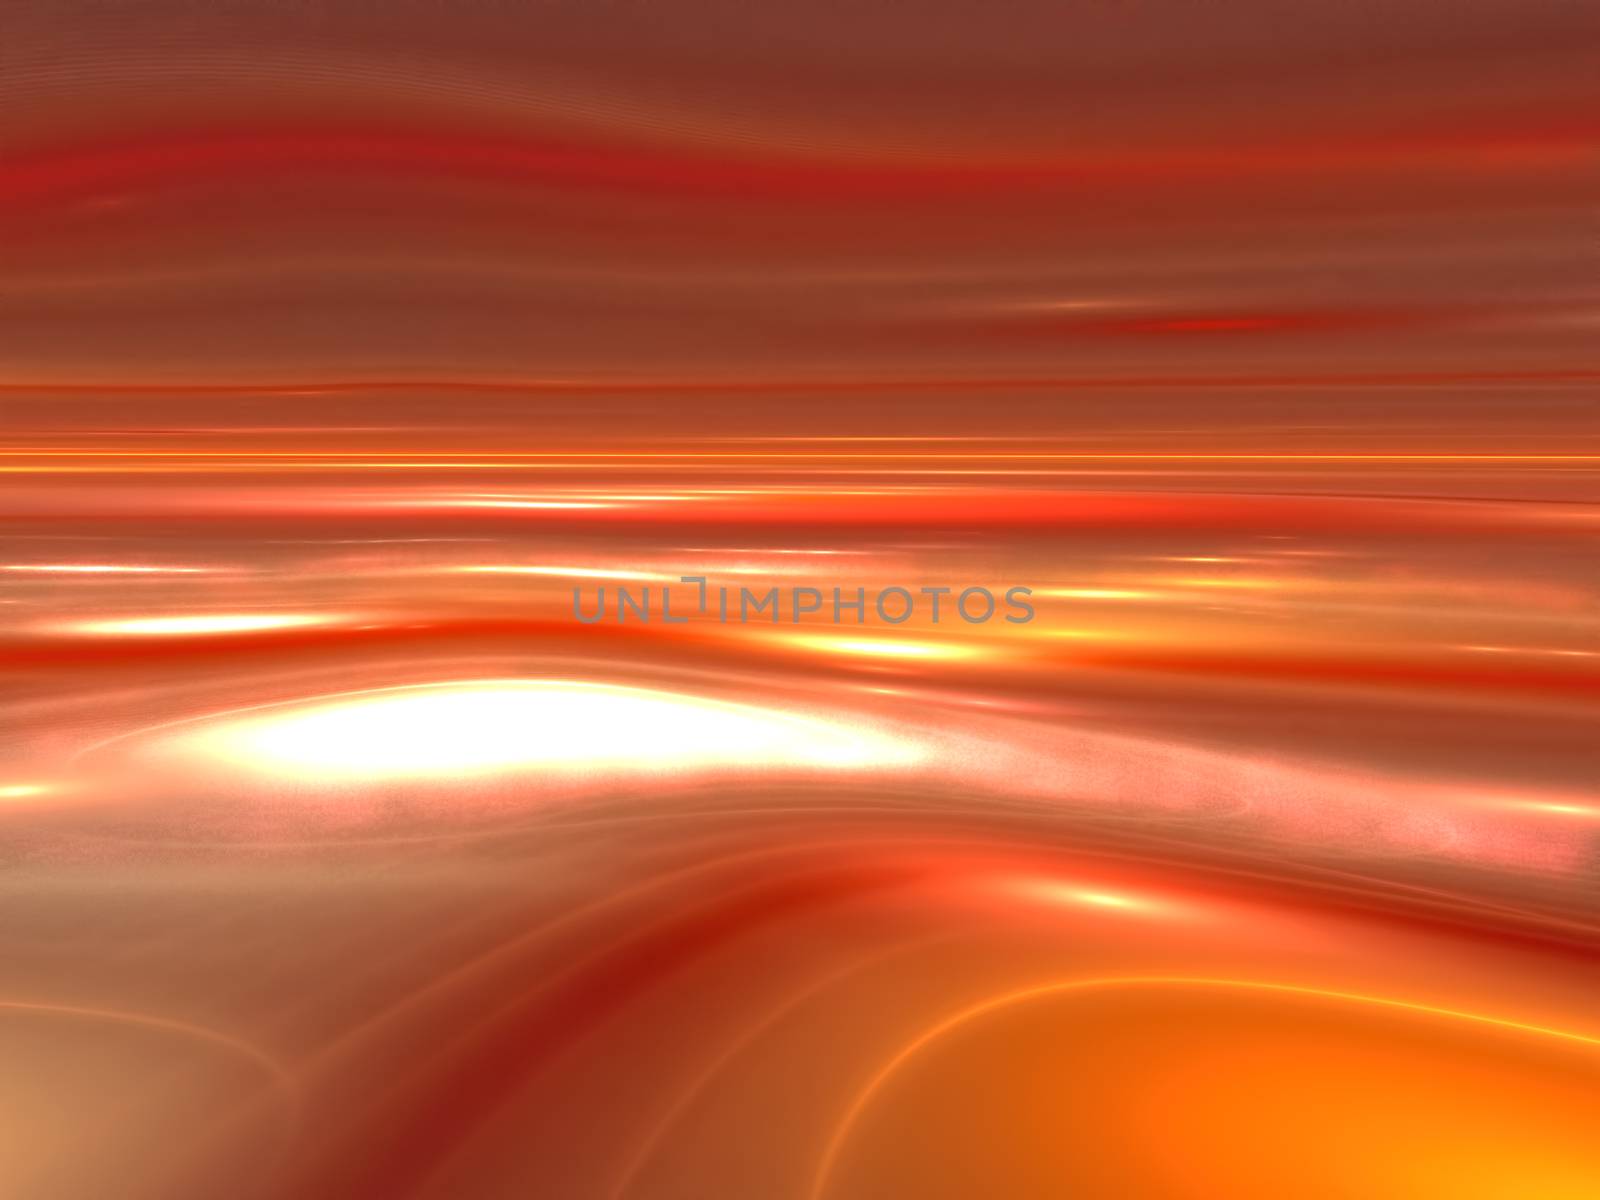 Alien sand landscape - abstract computer-generated image. Fractal art: curves and light spots like dunes in the desert. For covers, web design, posters.